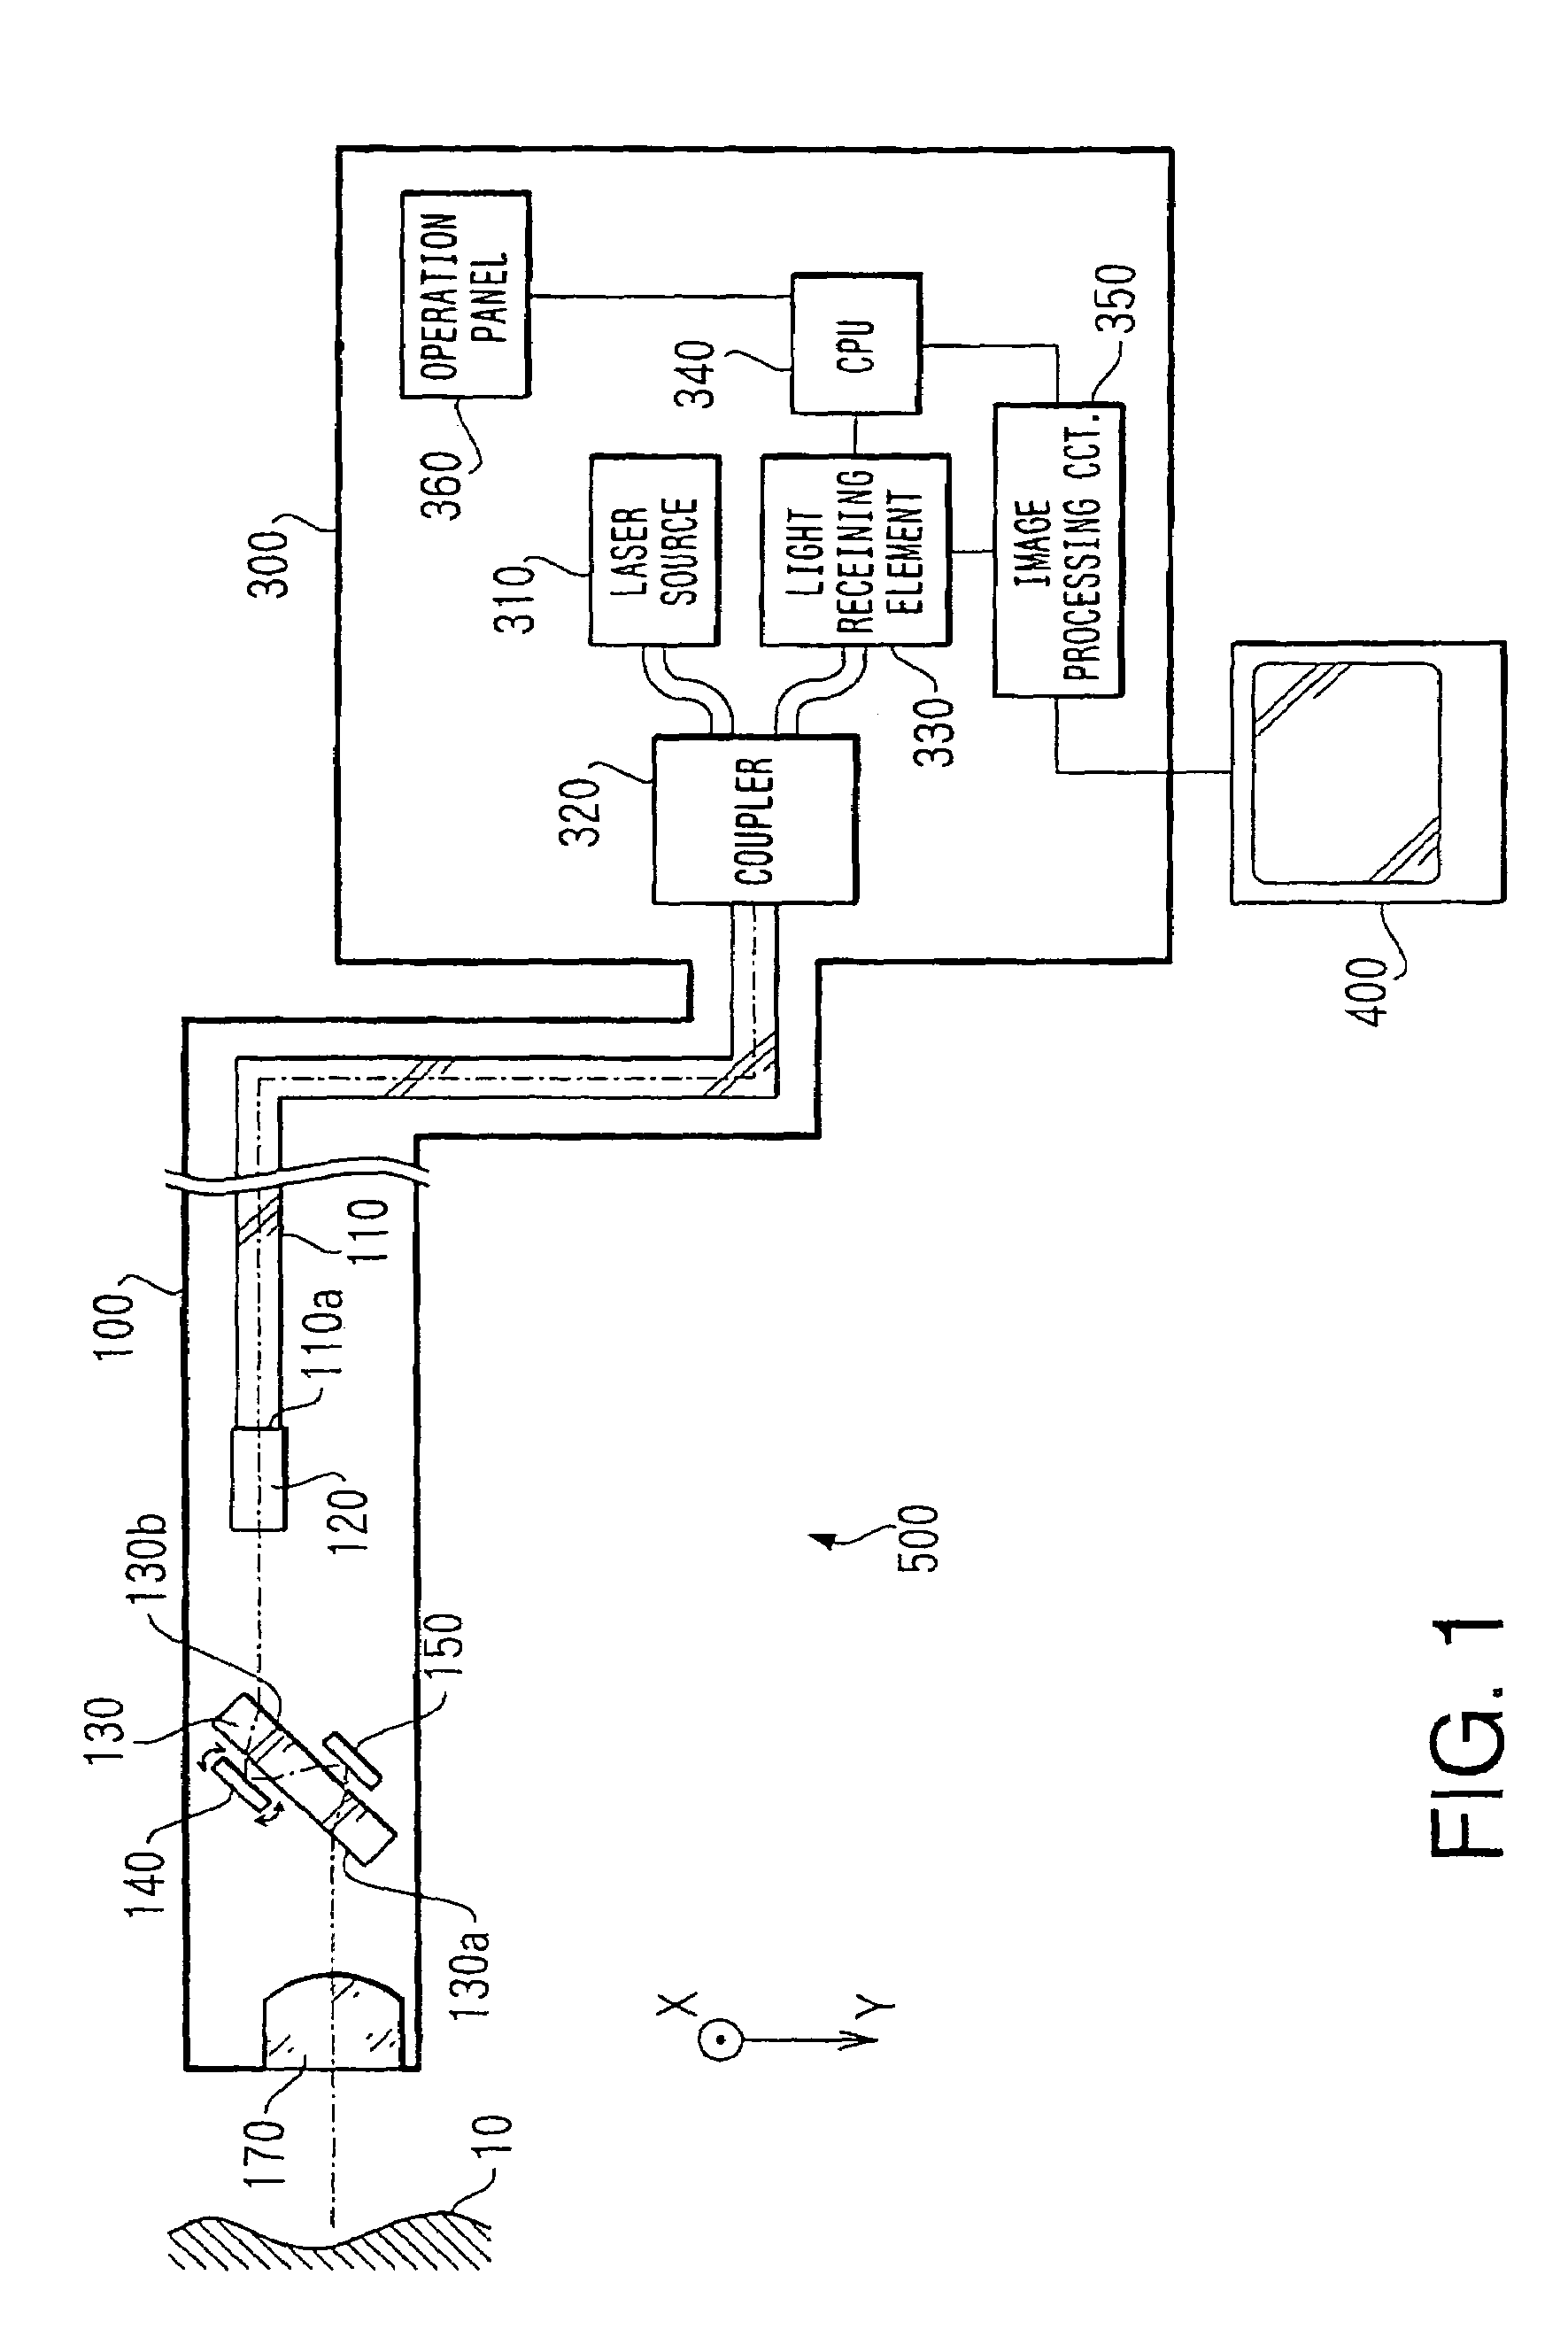 Confocal probe having scanning mirrors mounted to a transparent substrate in an optical path of the probe